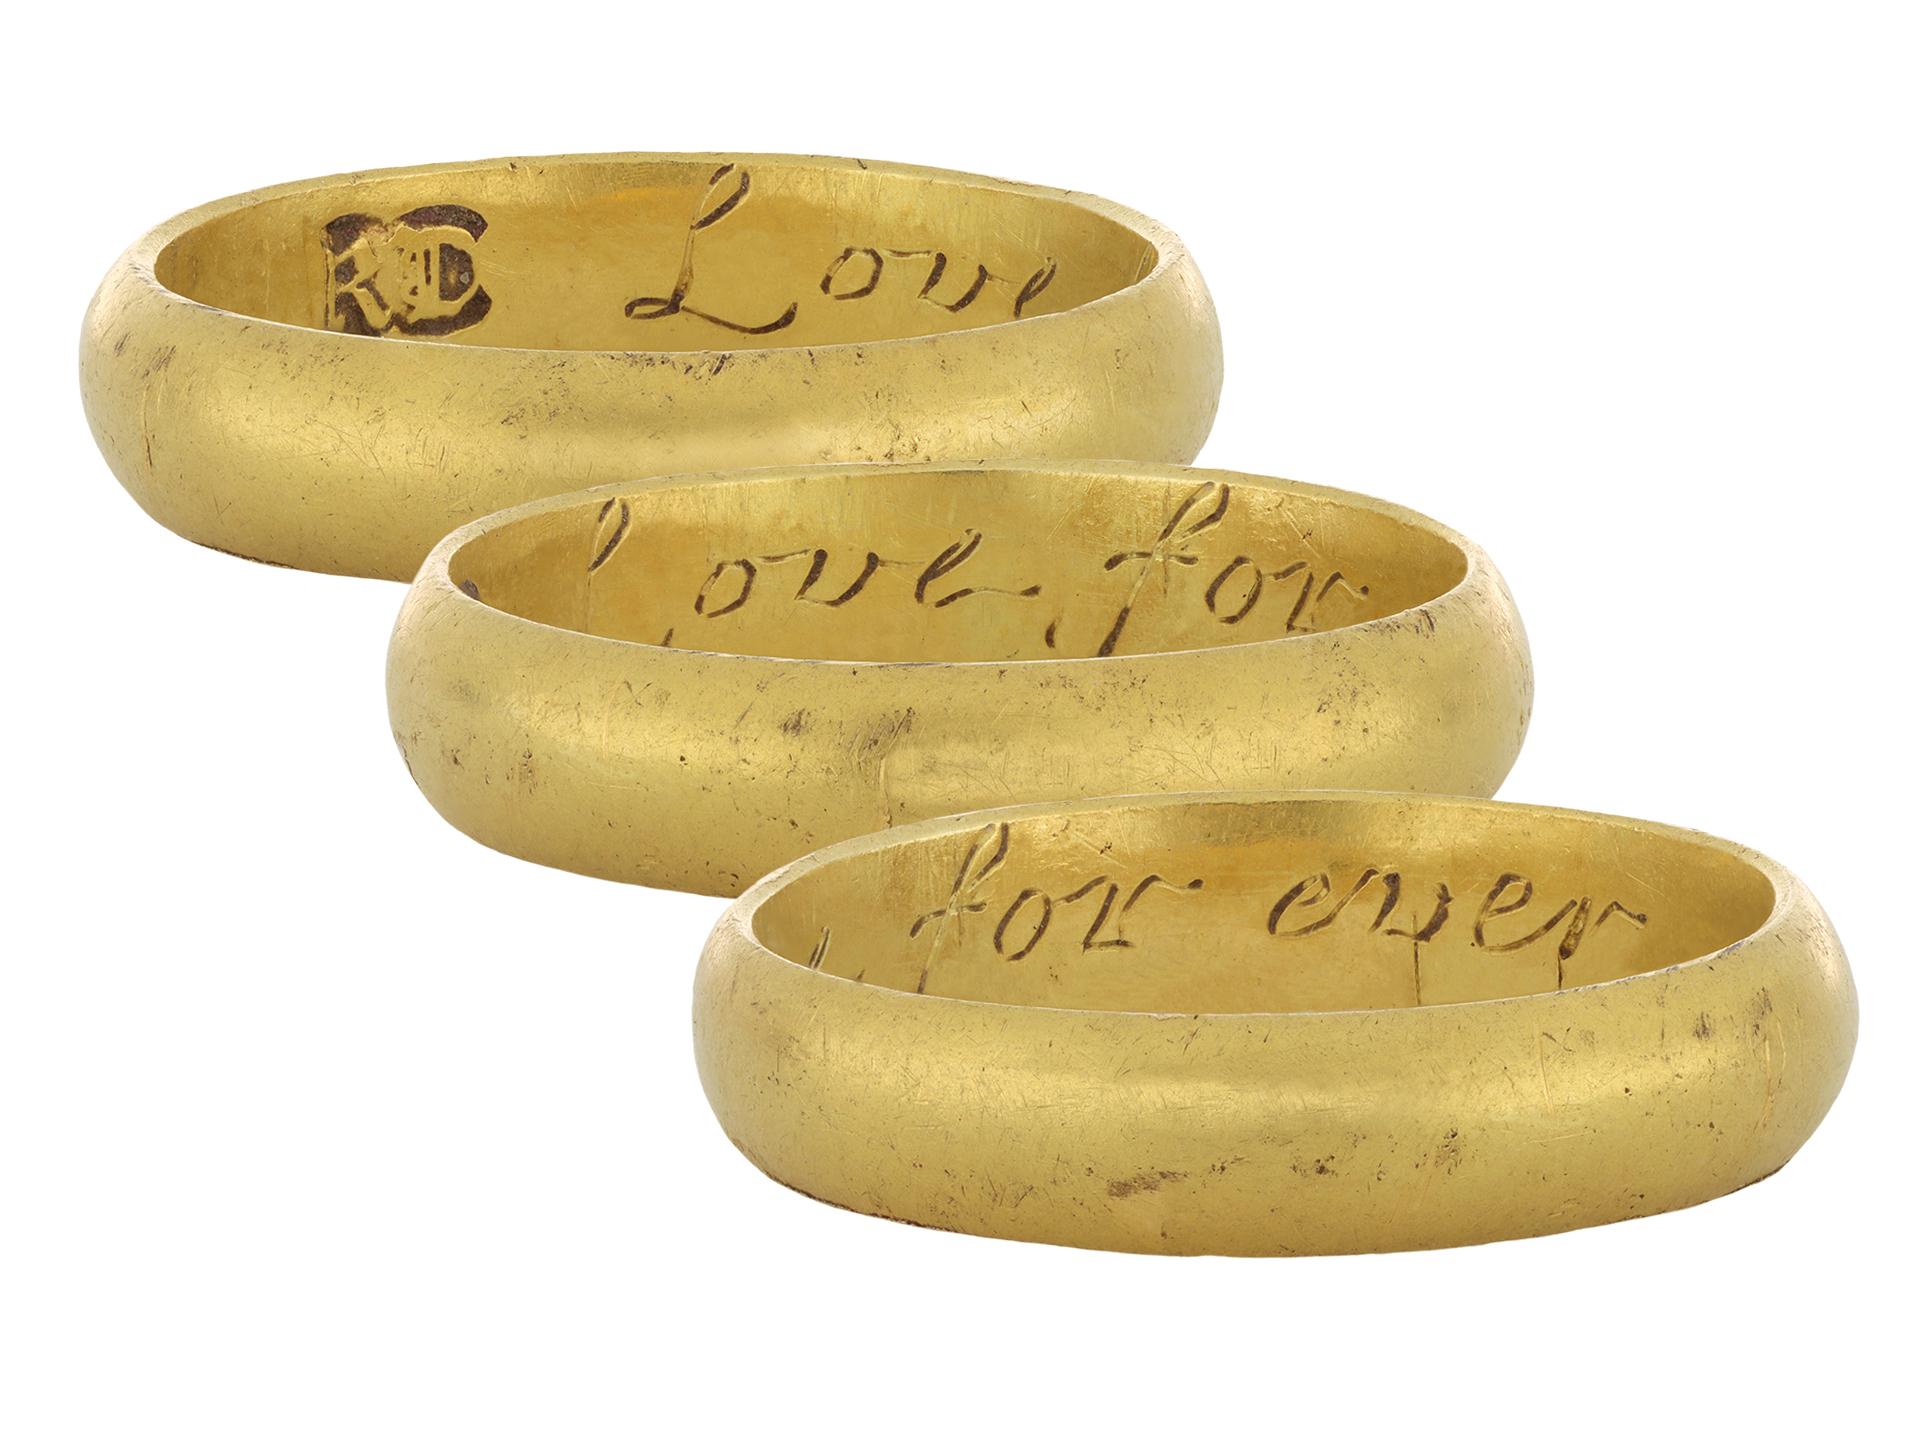 Post Medieval gold posy ring 'love for ever'. A smoothly conforming yellow gold D-shape band, engraved to the interior in italic script 'love for ever', approximately 5mm in width and 1.7mm thick. Tested yellow gold, approximately 6.16 grams in